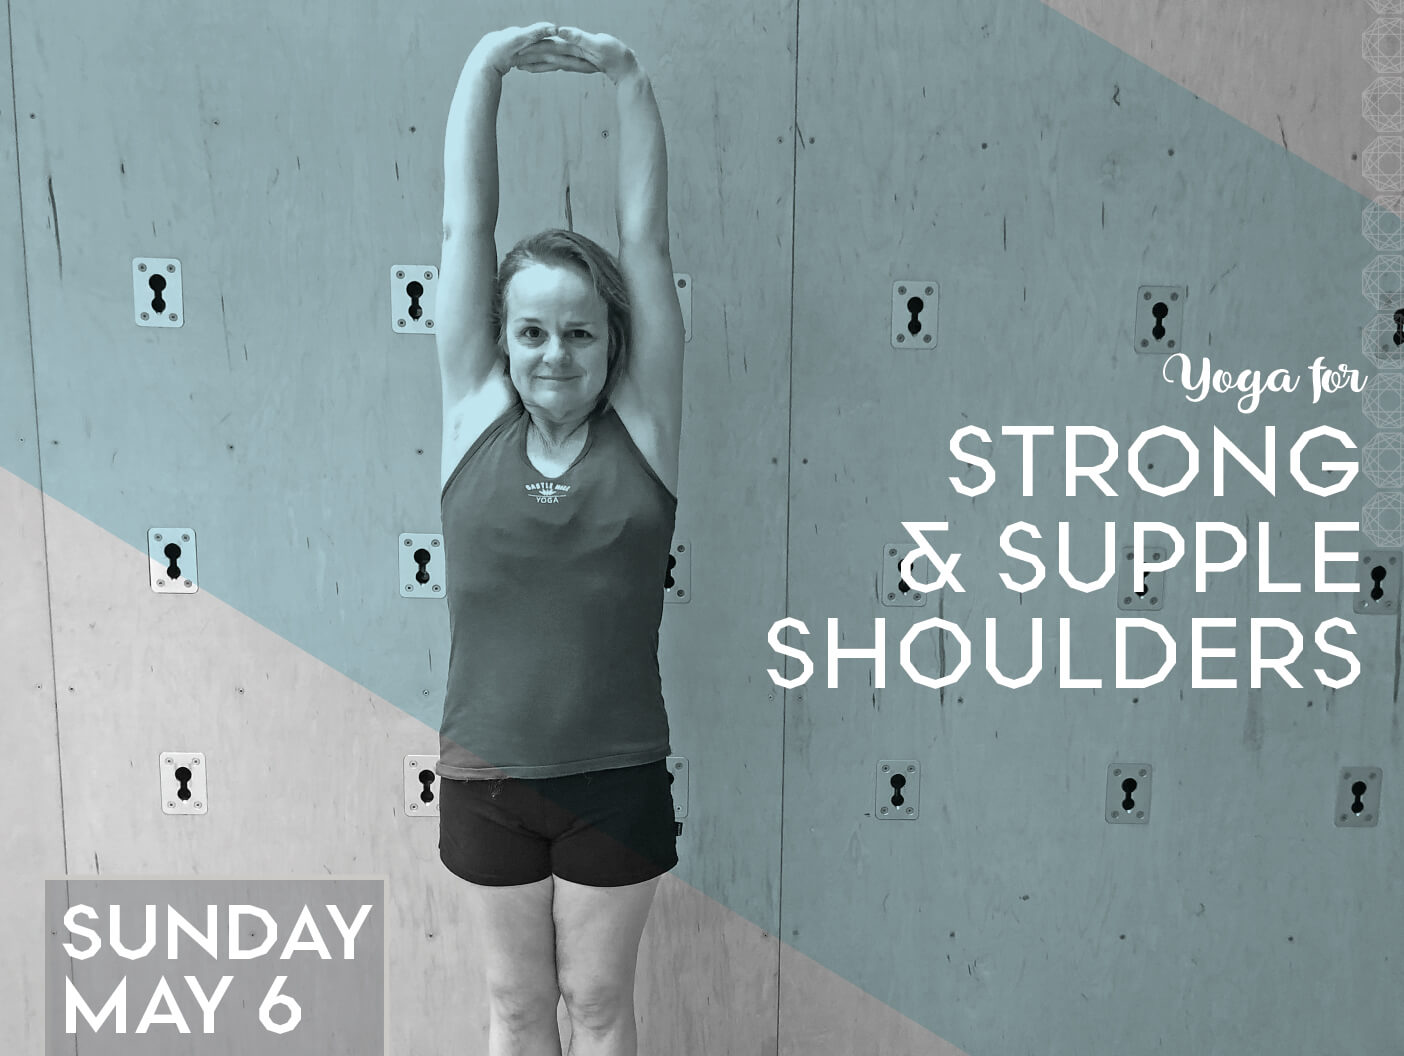 Yoga for Strong & Supple Shoulders